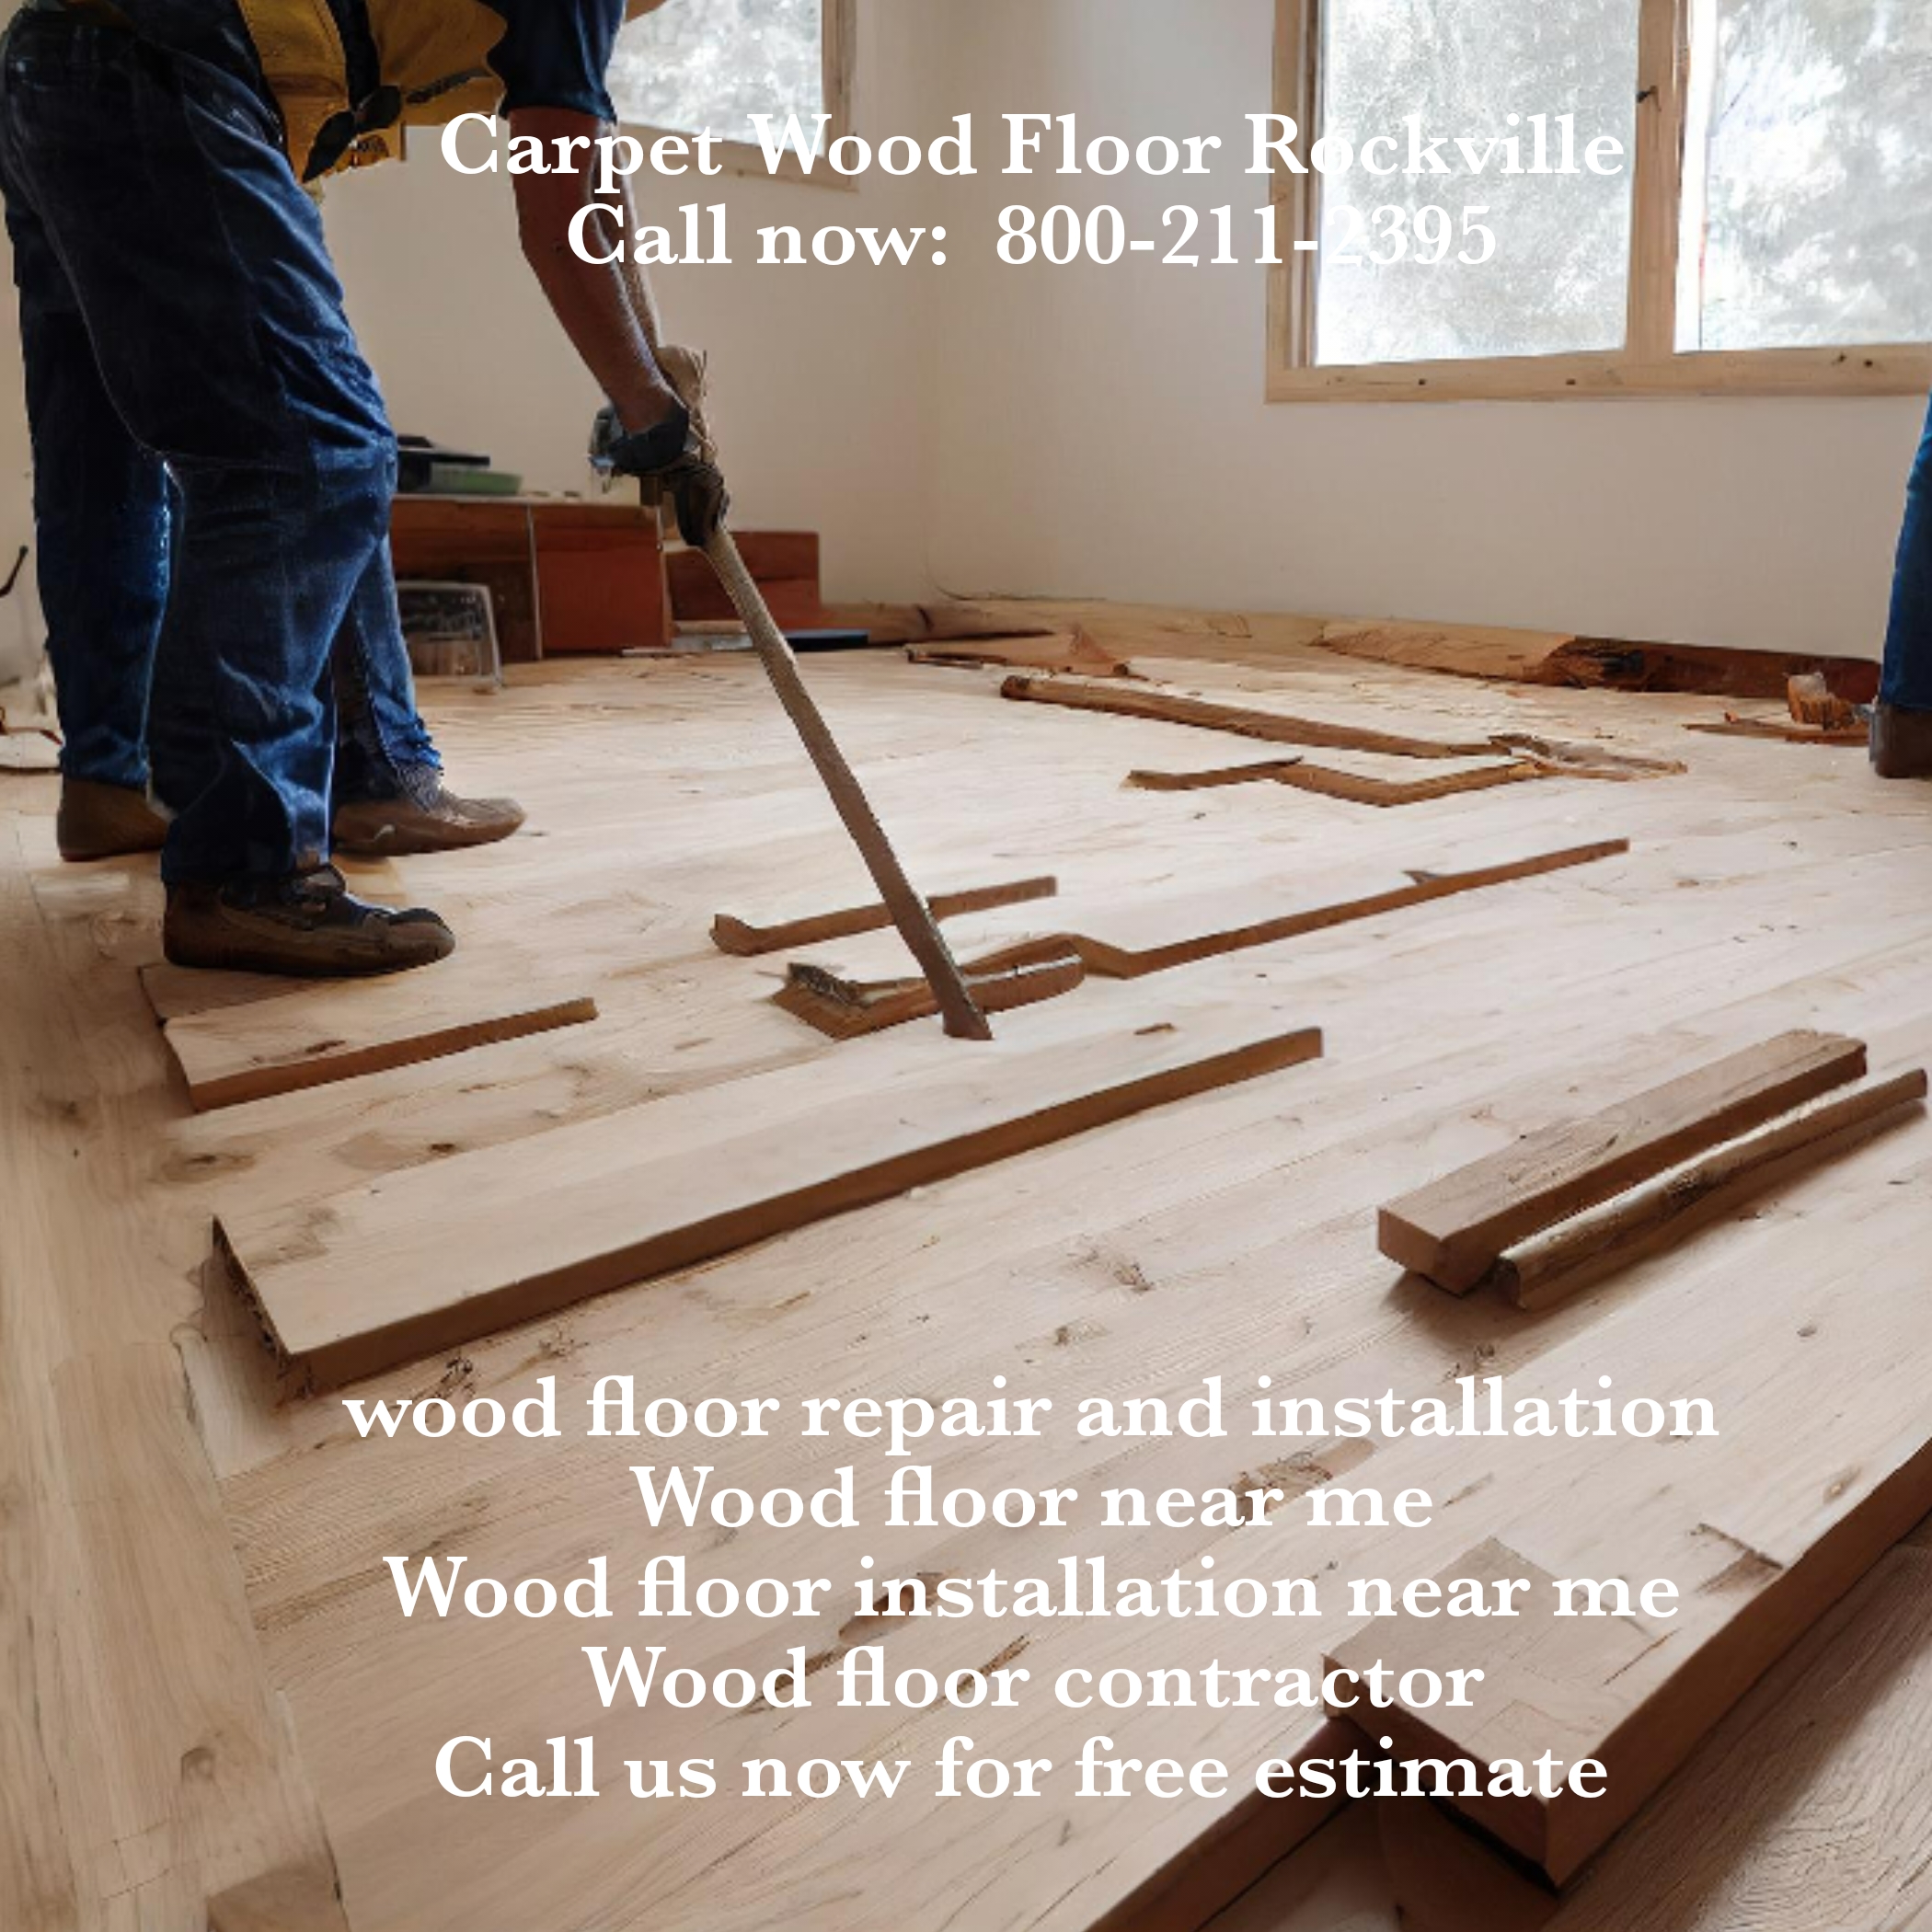 How to maintain effectiveness of wood flooring?